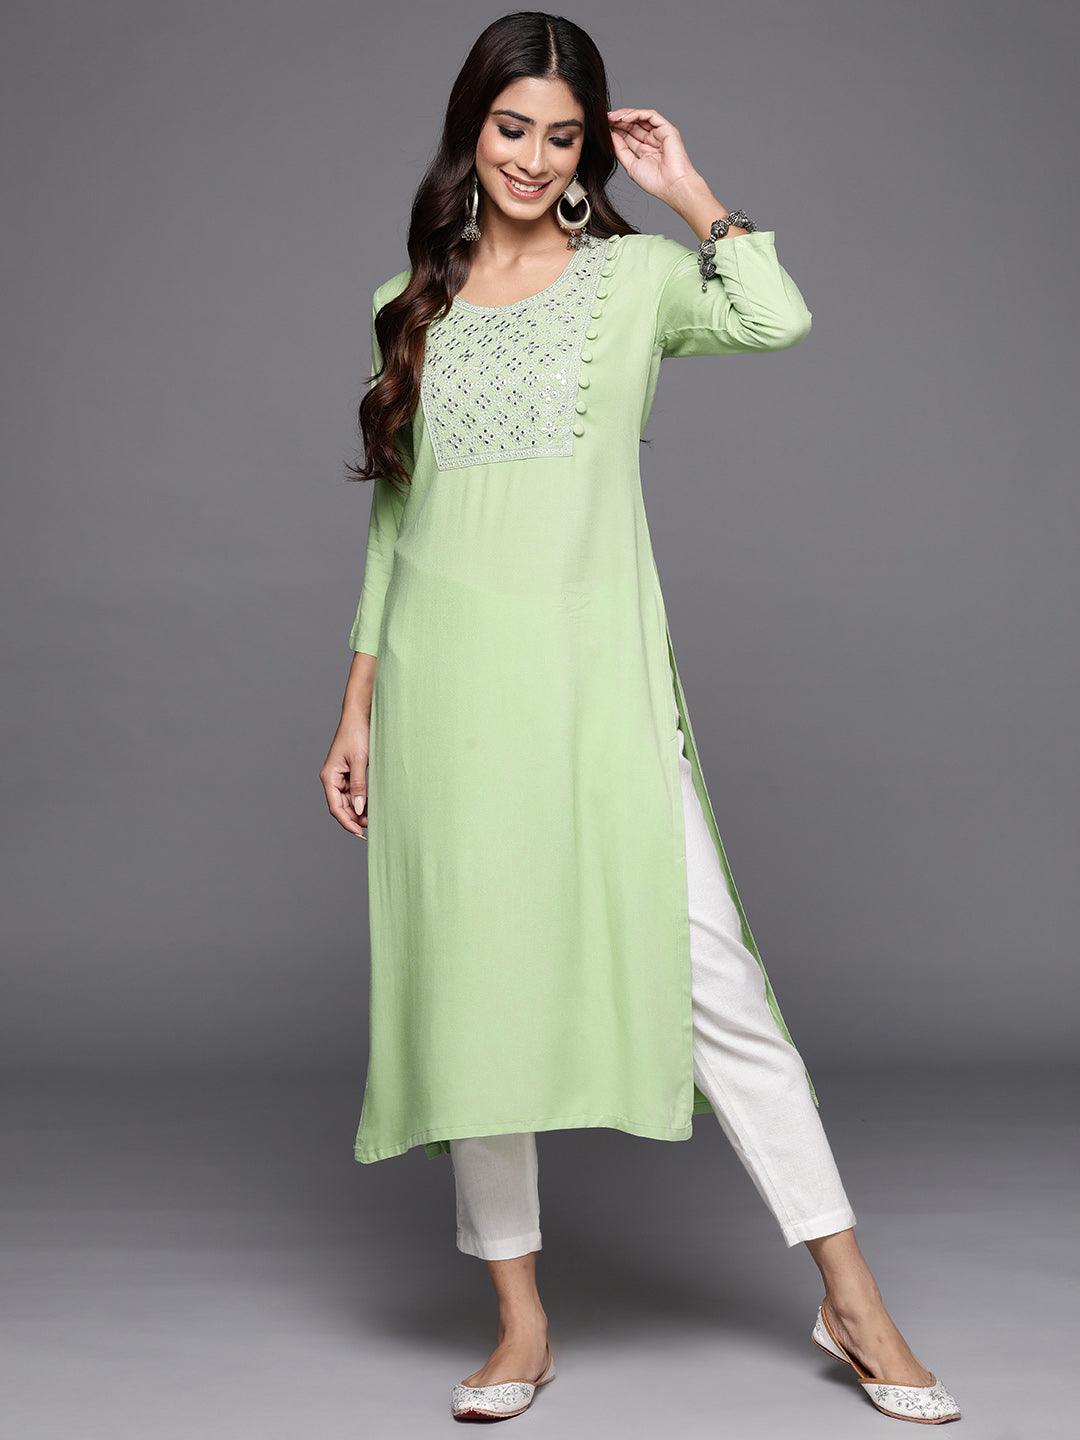 Look STYLISH in Kurti: Here's How to Dress up